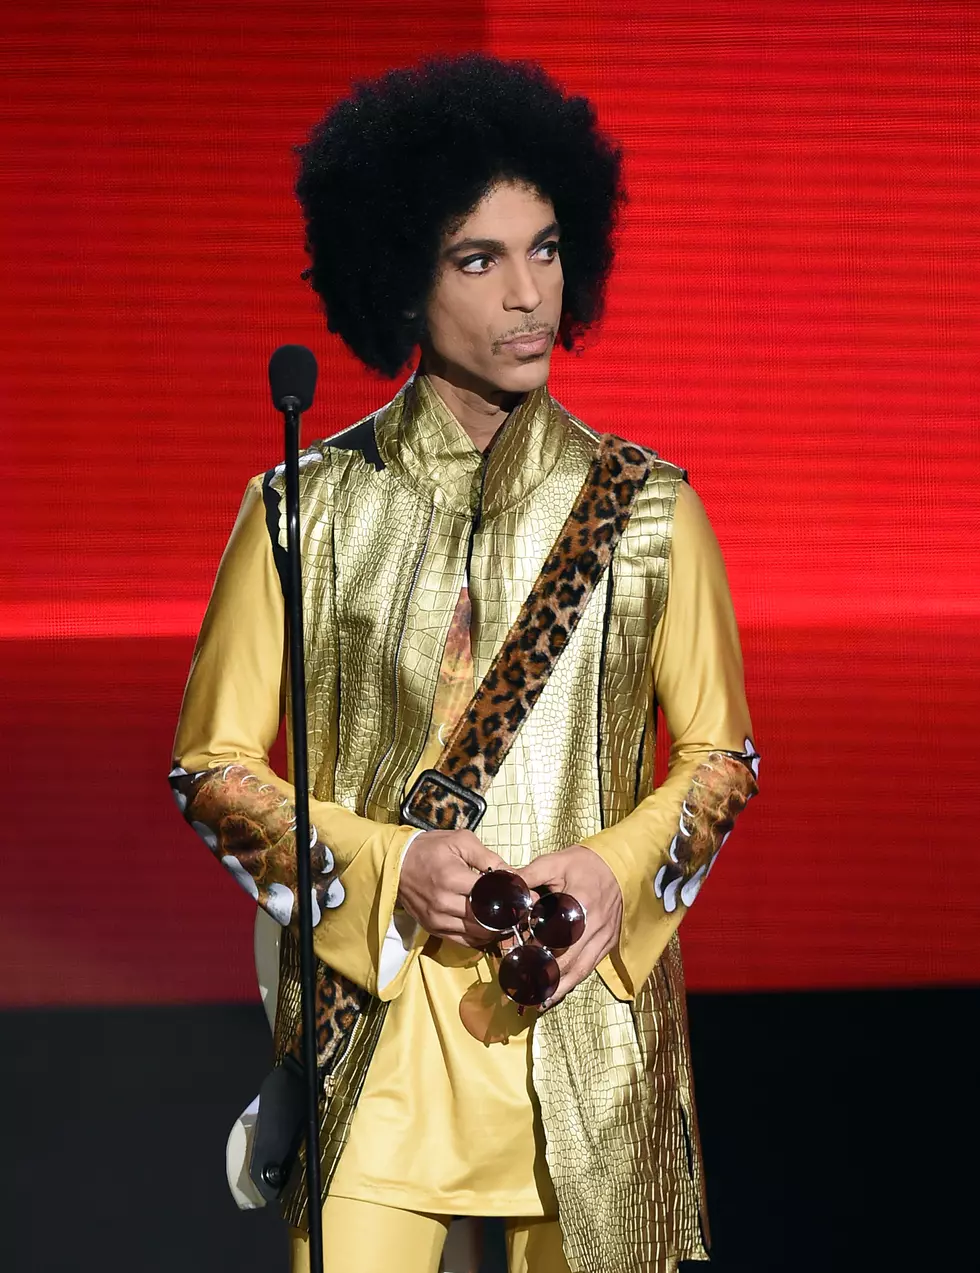 Prince Autopsy Scheduled For Today – Tha Wire